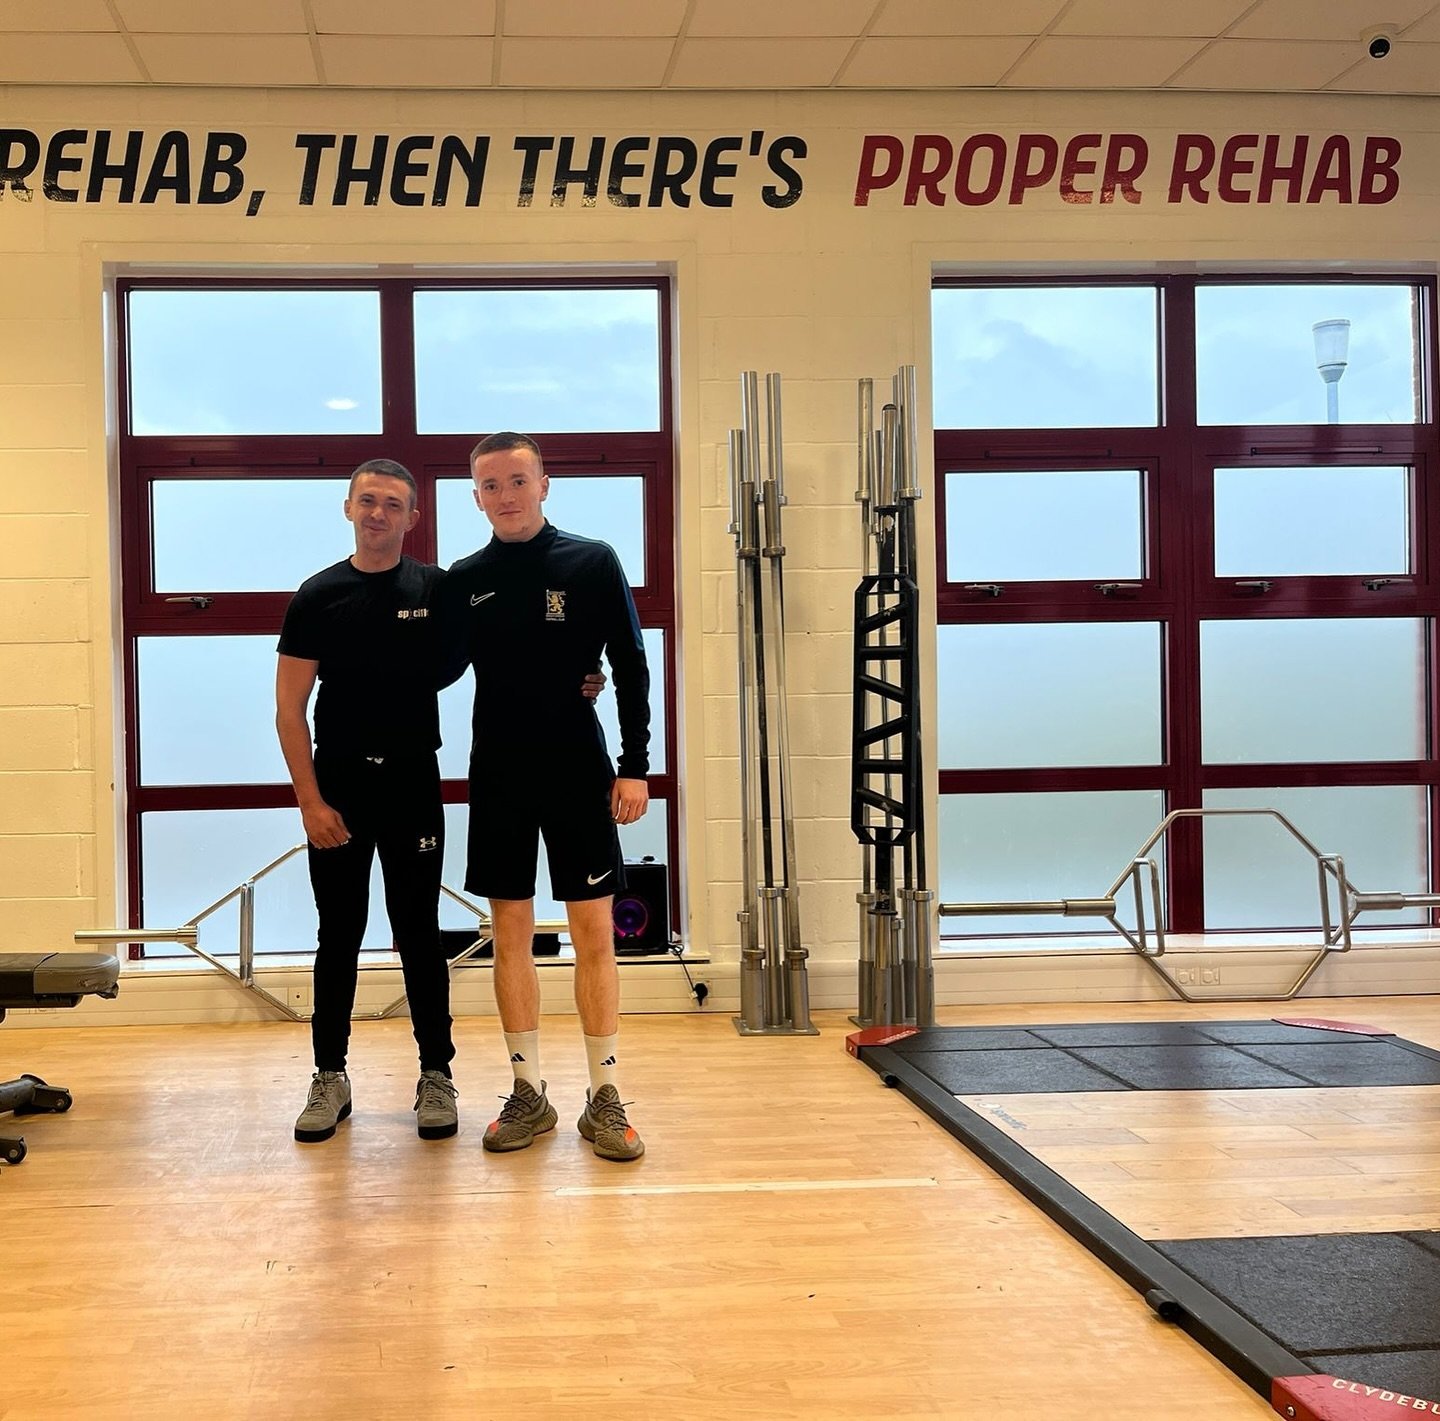 A wee knee injury was causing Tyler a bit of grief. 😓

After a wee 4 weeker on Proper Rehab thats him signed off and back on a Return to Play protocol. ✅⚽️

Remember  #TheresRehabThenTheresProperRehab 😉⛑️

DM us to get started on your return. 💪🏽